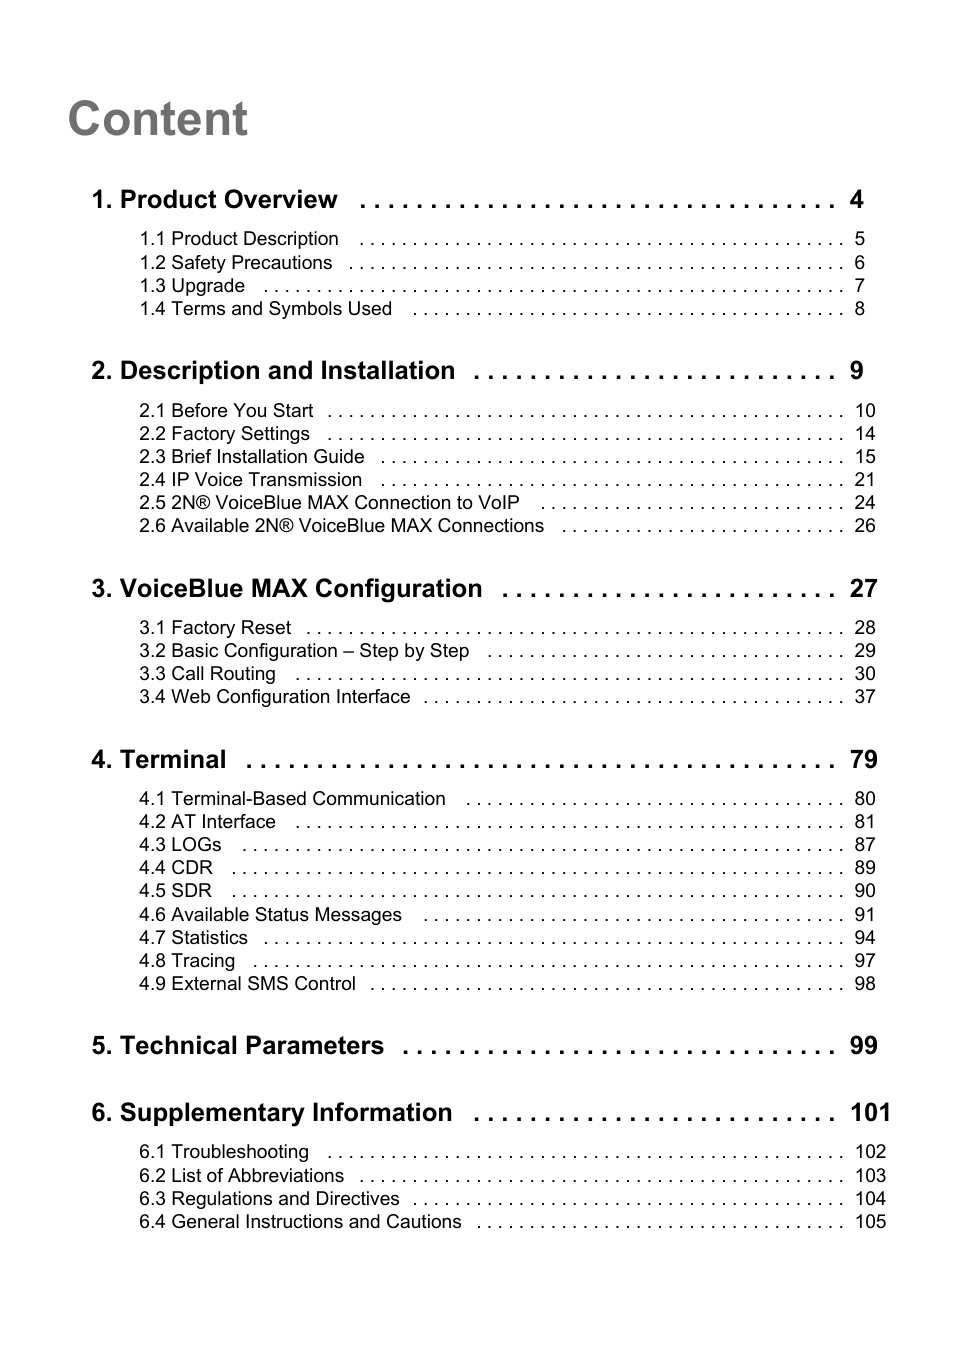 Content, Product overview, Description and installation | Voiceblue max configuration, Terminal, Technical parameters 6. supplementary information | 2N VoiceBlue MAX v1.3 User Manual | Page 3 / 107